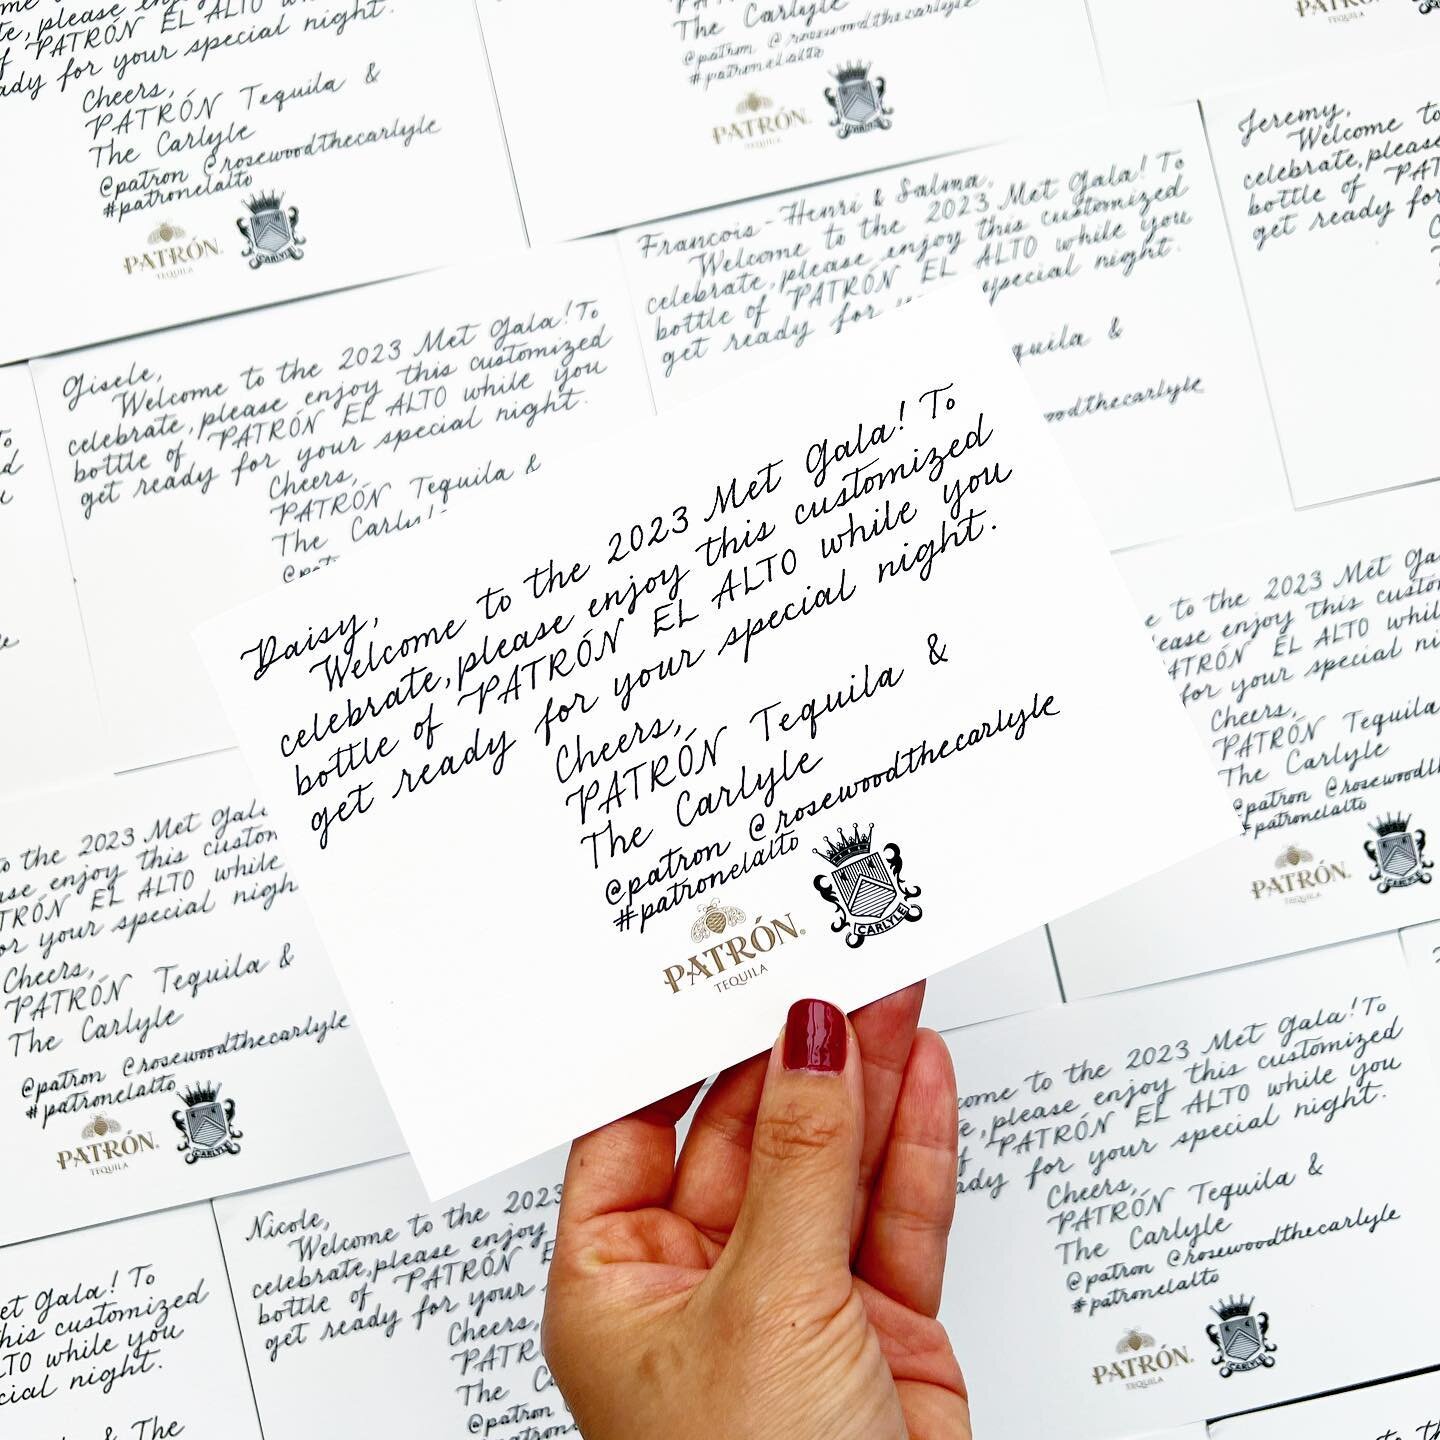 Met Gala cards for @patron &amp; @rosewoodthecarlyle! It&rsquo;s been a whirlwind 2023 with tons of rush orders but I wouldn&rsquo;t have it any other way. Thankful to work with so many cool clients and agencies 💕 #nancymoyevents
.
Swipe to see some